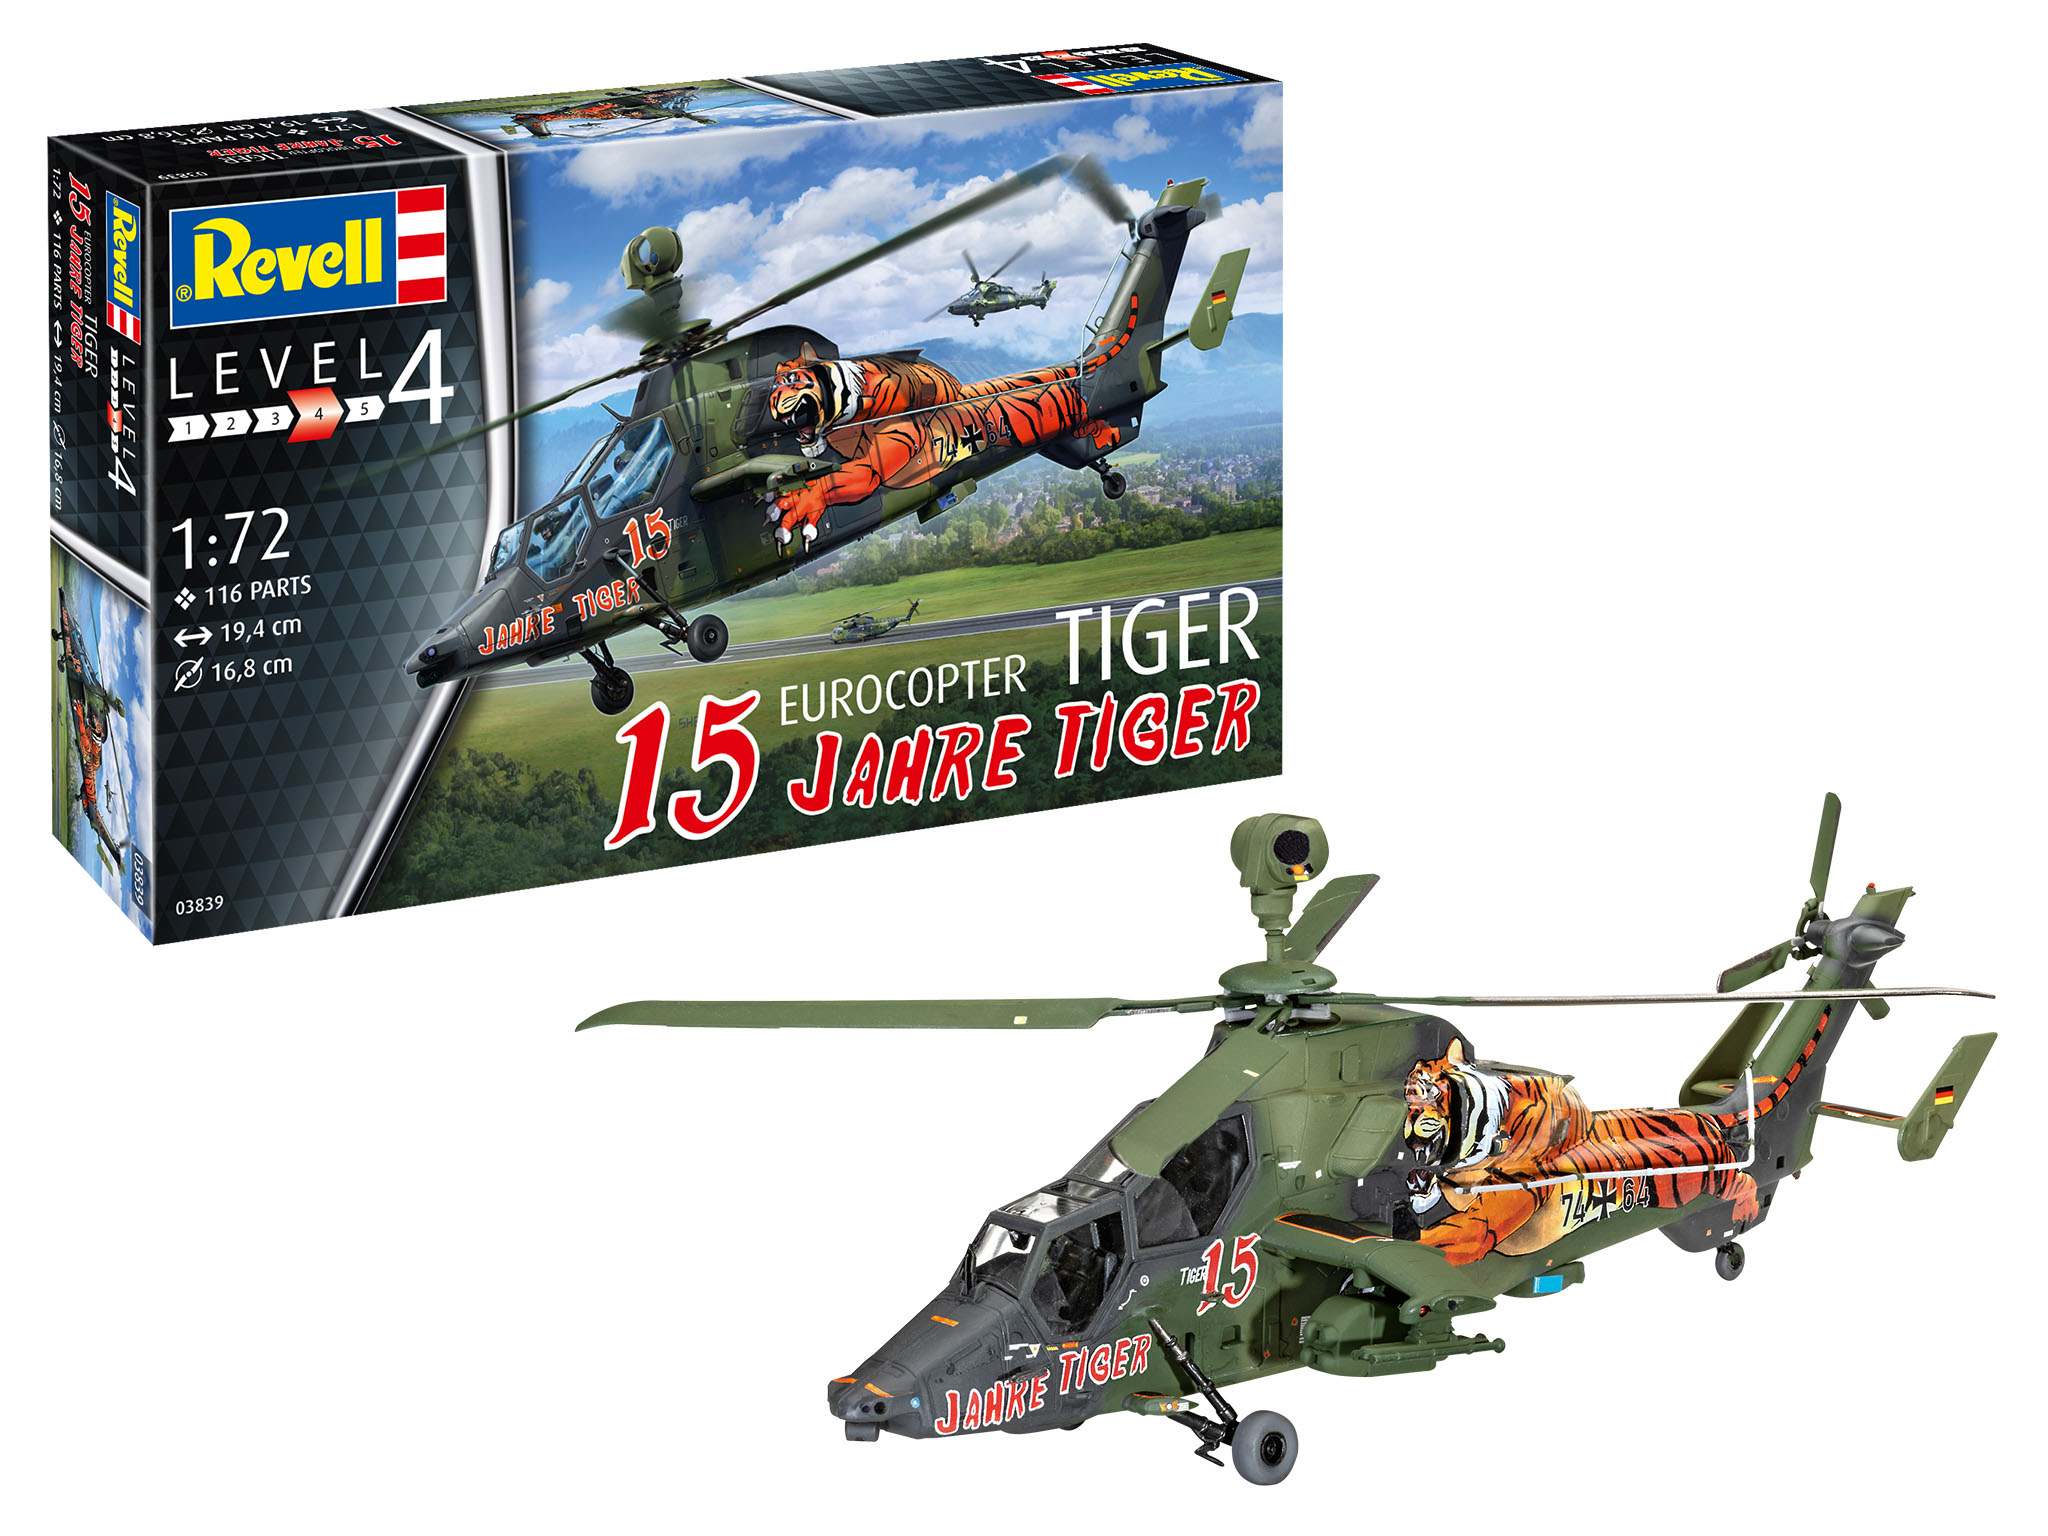 Revell 03839 Eurocopter Tiger 